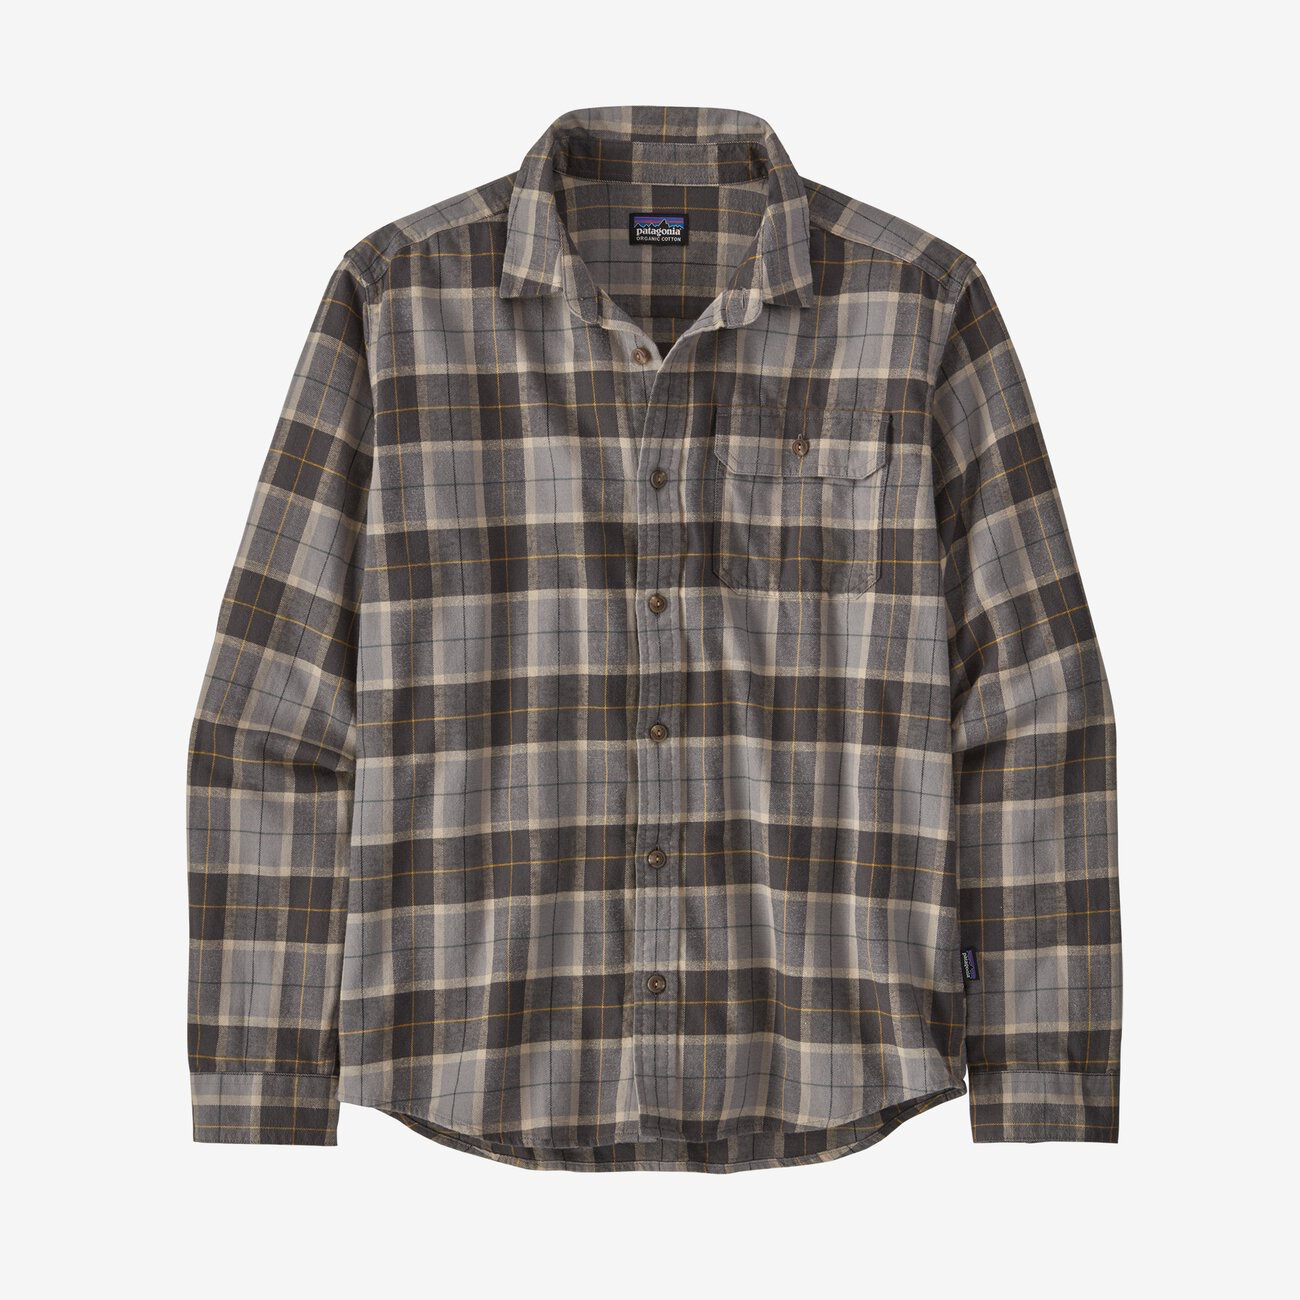 Patagonia M's L/S Cotton in Conversion LW Fjord Flannel Shirt - Beach Plaid: Forge Grey - XXL